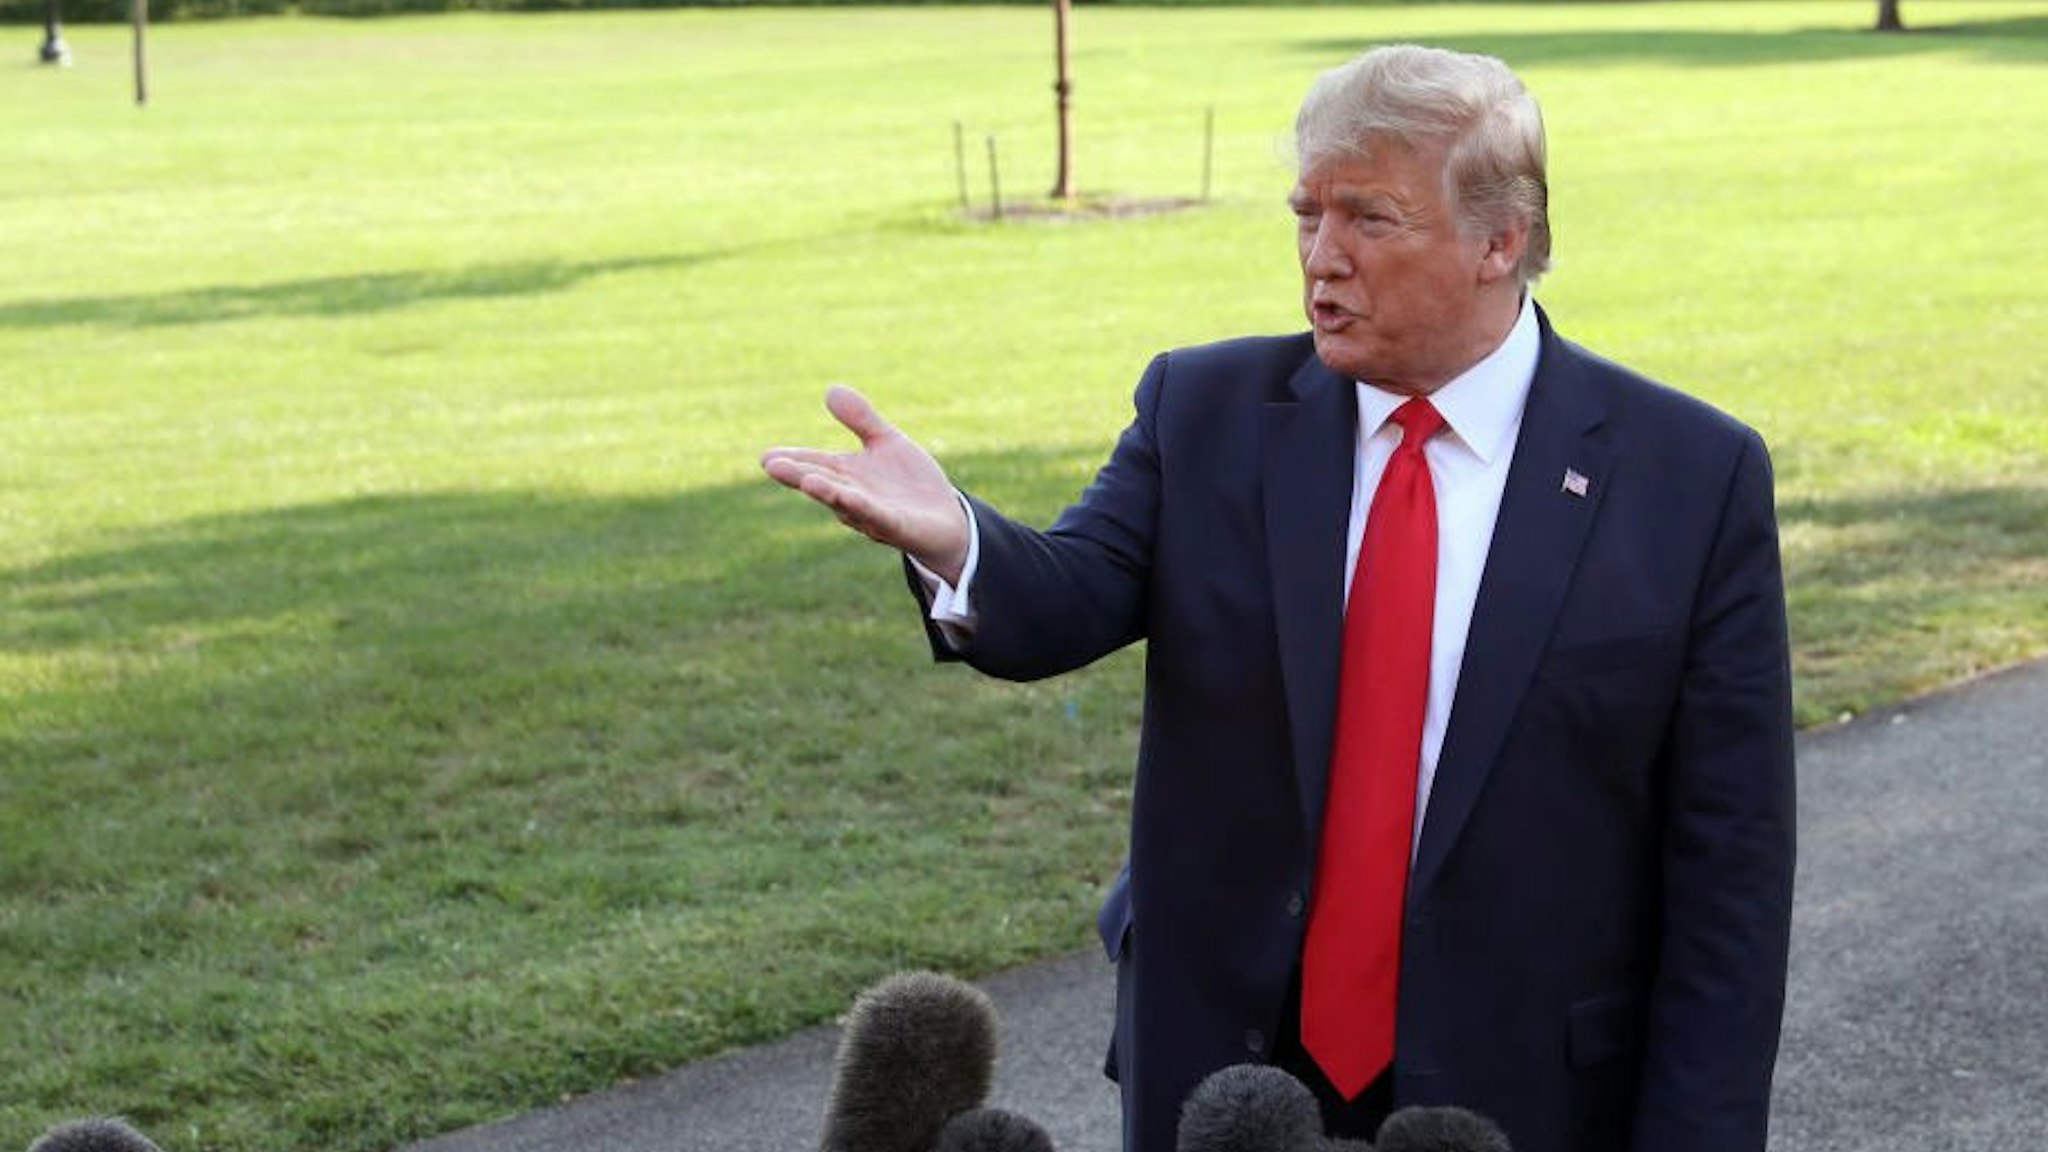 U.S. President Donald Trump speaks to the media before departing from the White House on September 16, 2019 in Washington, DC.